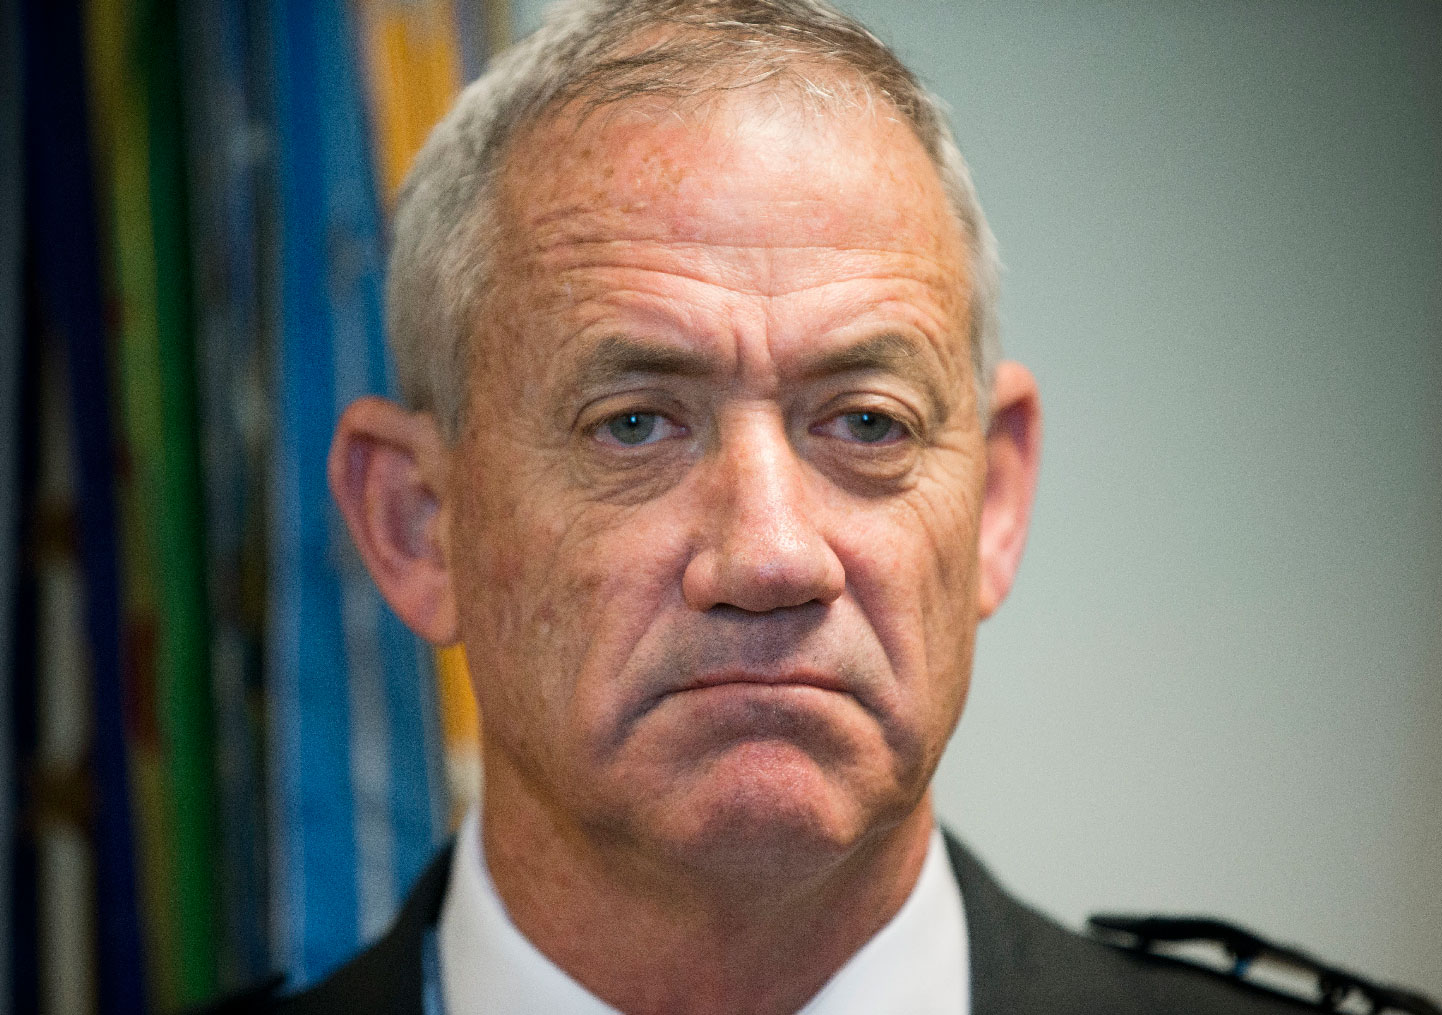 In this Thursday, Jan. 8, 2015 file photo, Israeli Defense Minister Benny Gantz pauses as he answers questions from members of the media during his meeting with Joint Chiefs Chairman Gen. Martin E. Dempsey, at the Pentagon.